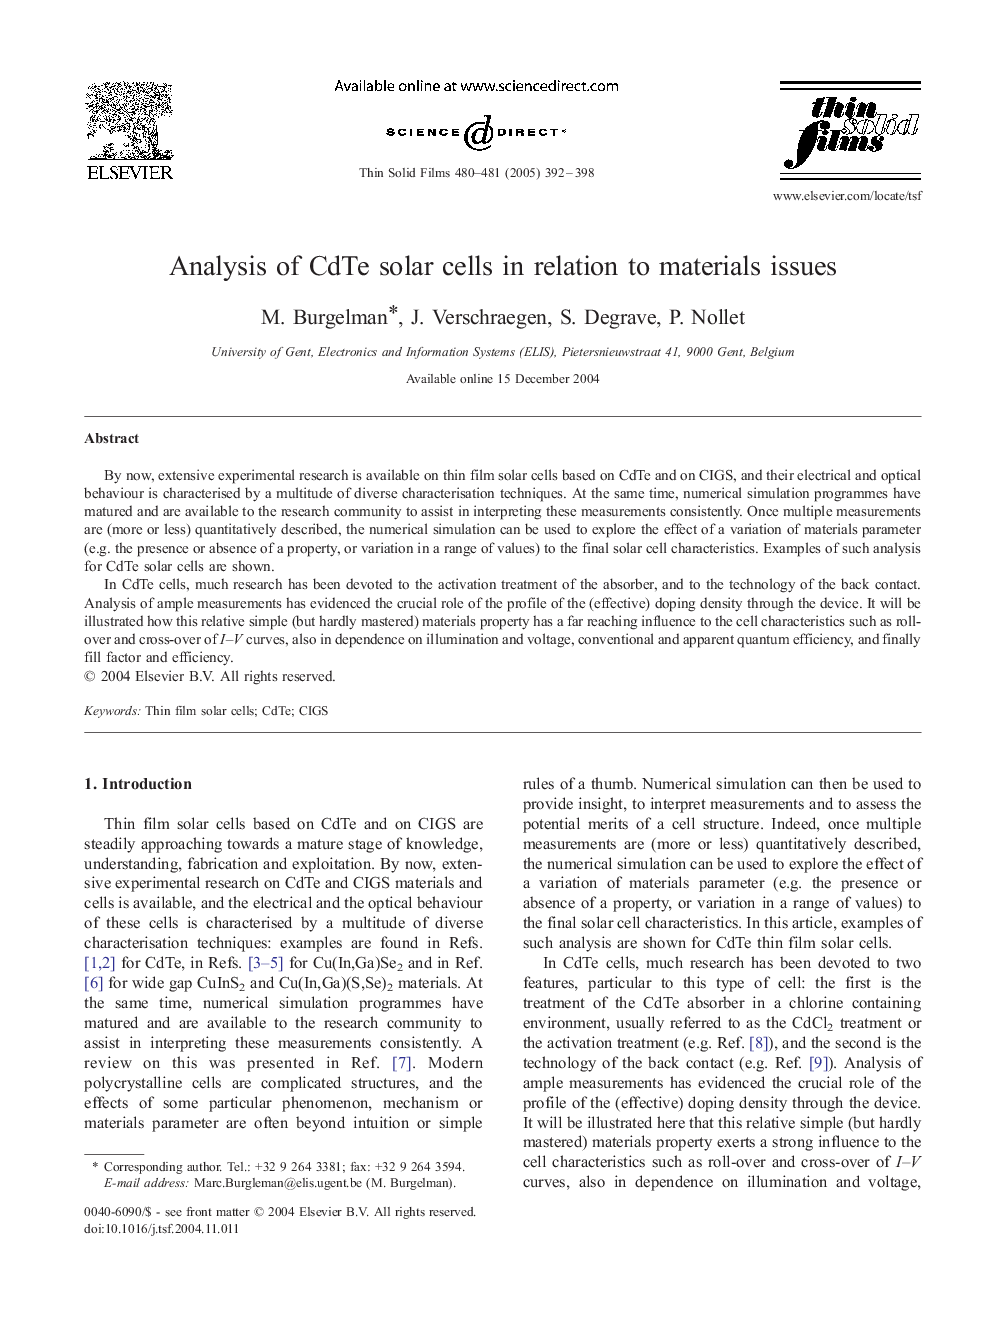 Analysis of CdTe solar cells in relation to materials issues